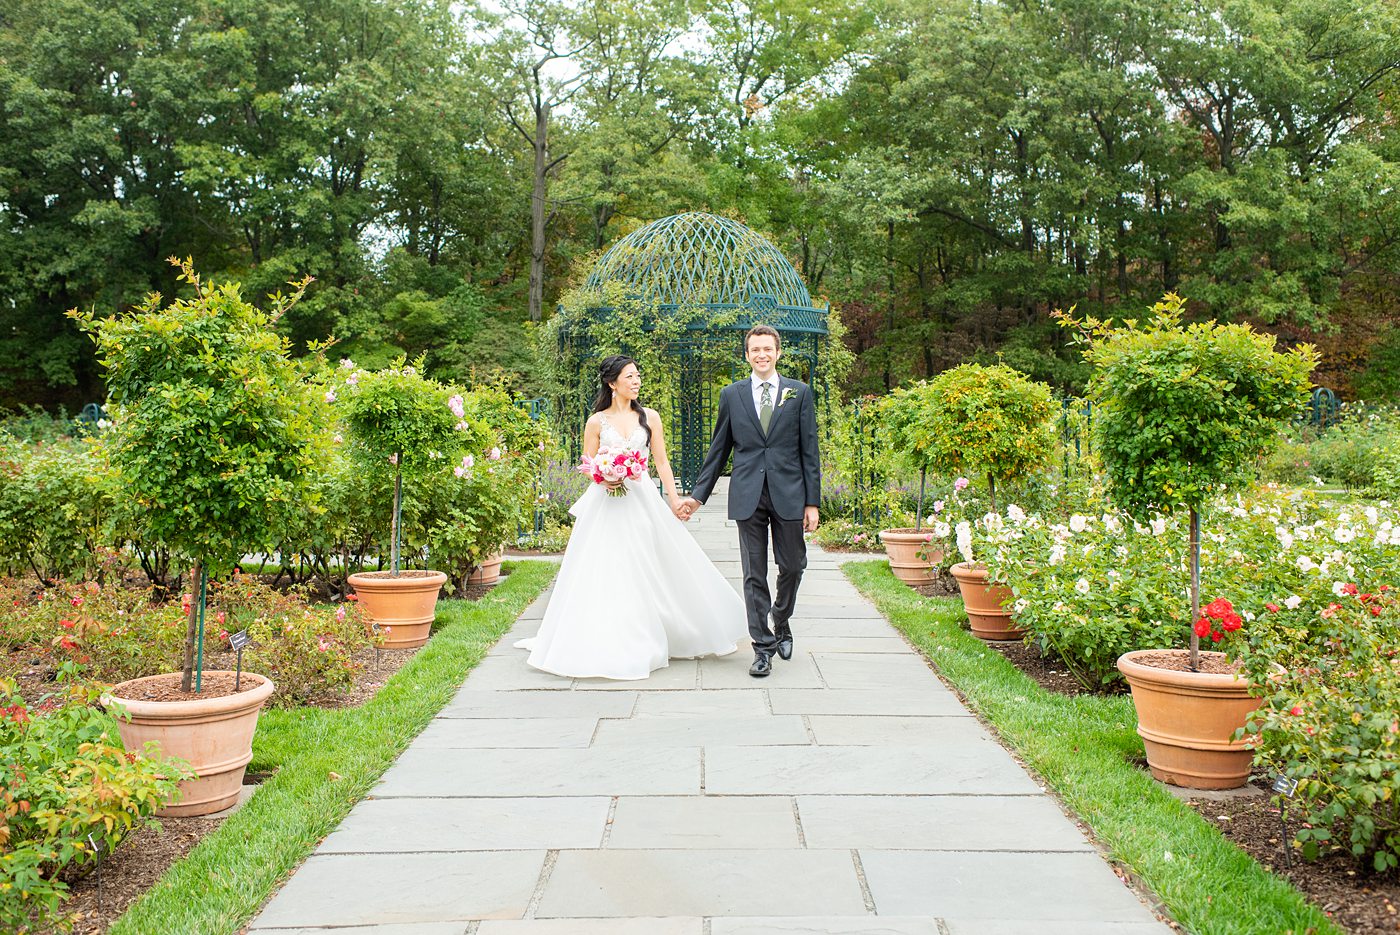 New York Botanical Garden wedding photos by Mikkel Paige Photography. The groom wore a green tie with floral detail and gray suit and bride a beaded ballgown with bow on the back. After the couple's engagement photoshoot in Manhattan I was so excited for their fall wedding near the Conservatory at the Terrace Room, at this NYC venue. #mikkelpaige #nybg #asianbride #bridestyle #brideandgroom #newyorkbotanicalgardenwedding #groomstyle #NYBotanicalGarden #Bronxwedding #newyorkcityweddingvenue